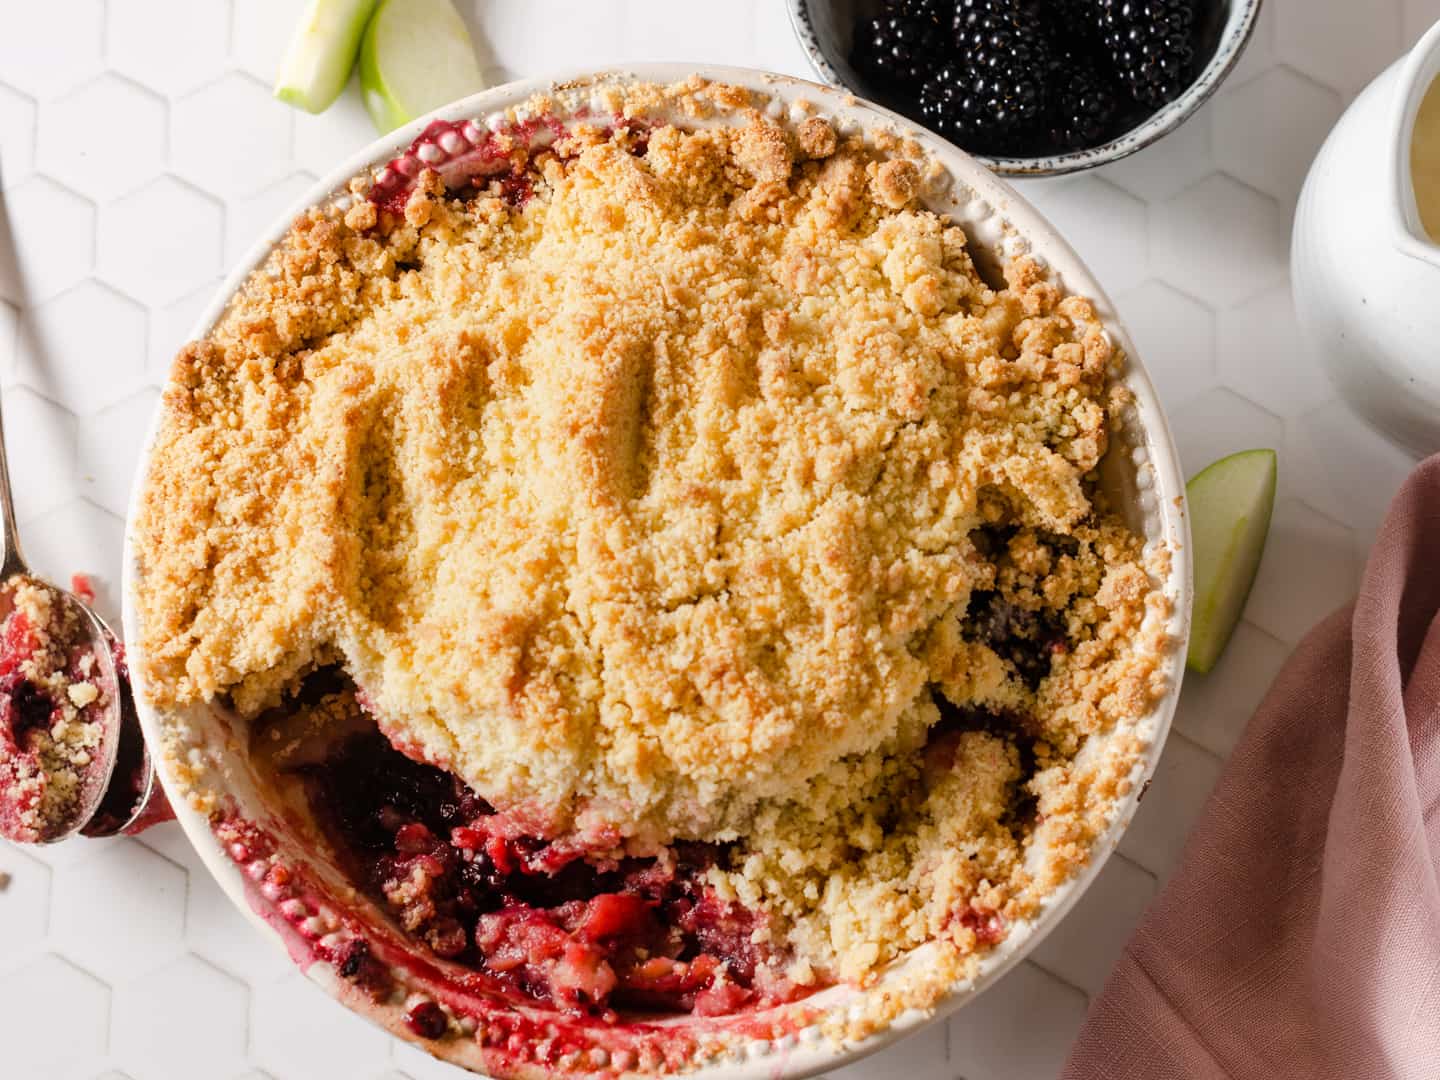 A blackberry and apple crumble freshly out of the oven.